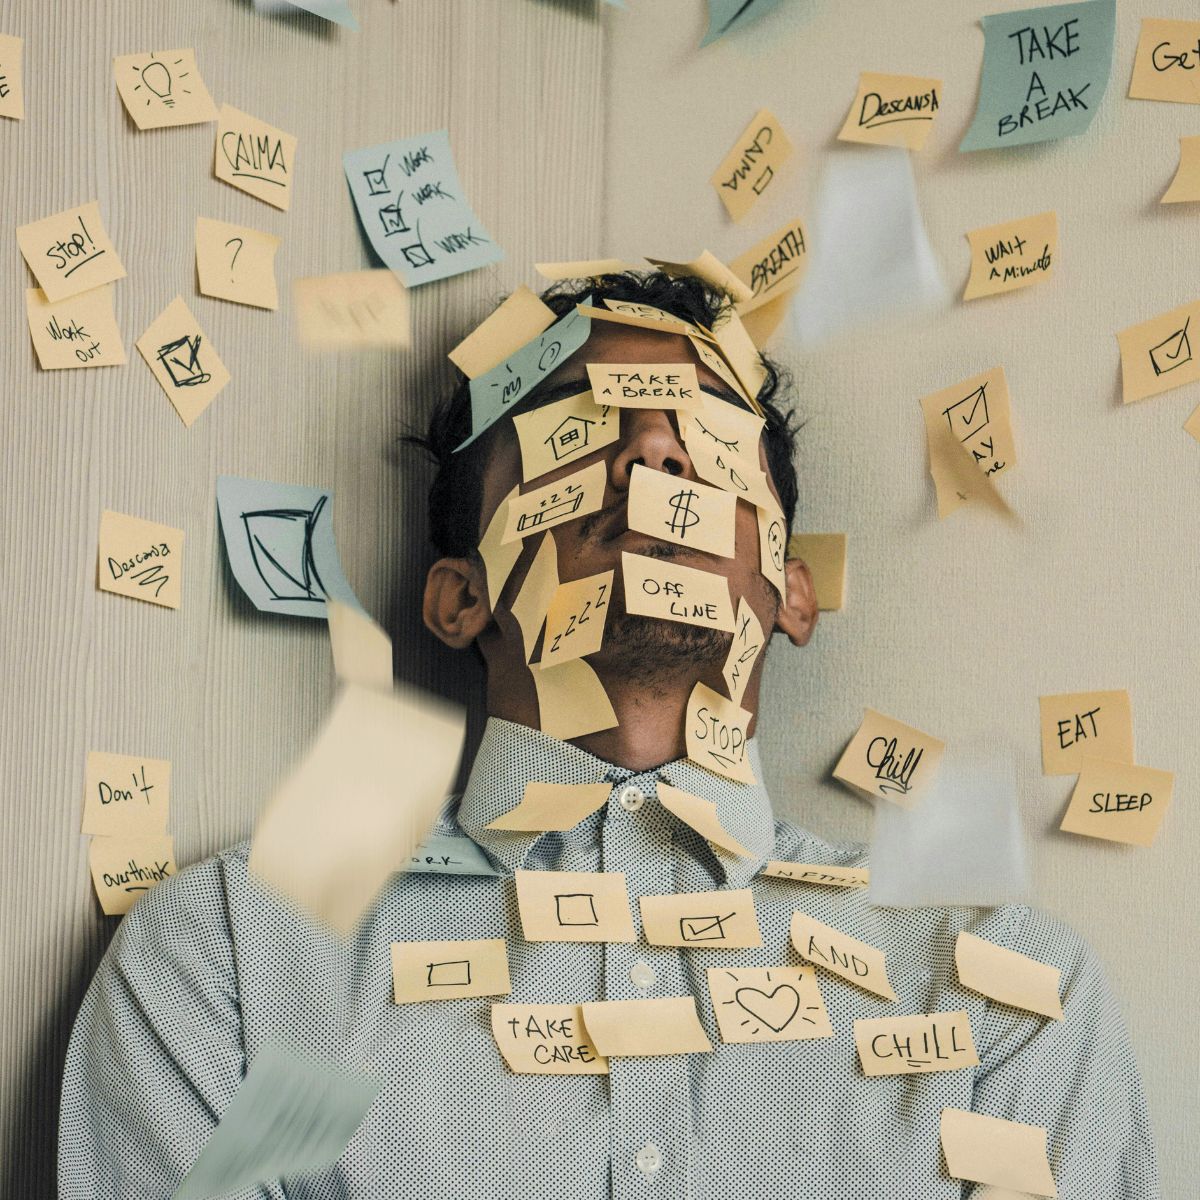 A man lying on the floor covered by sticky notes.